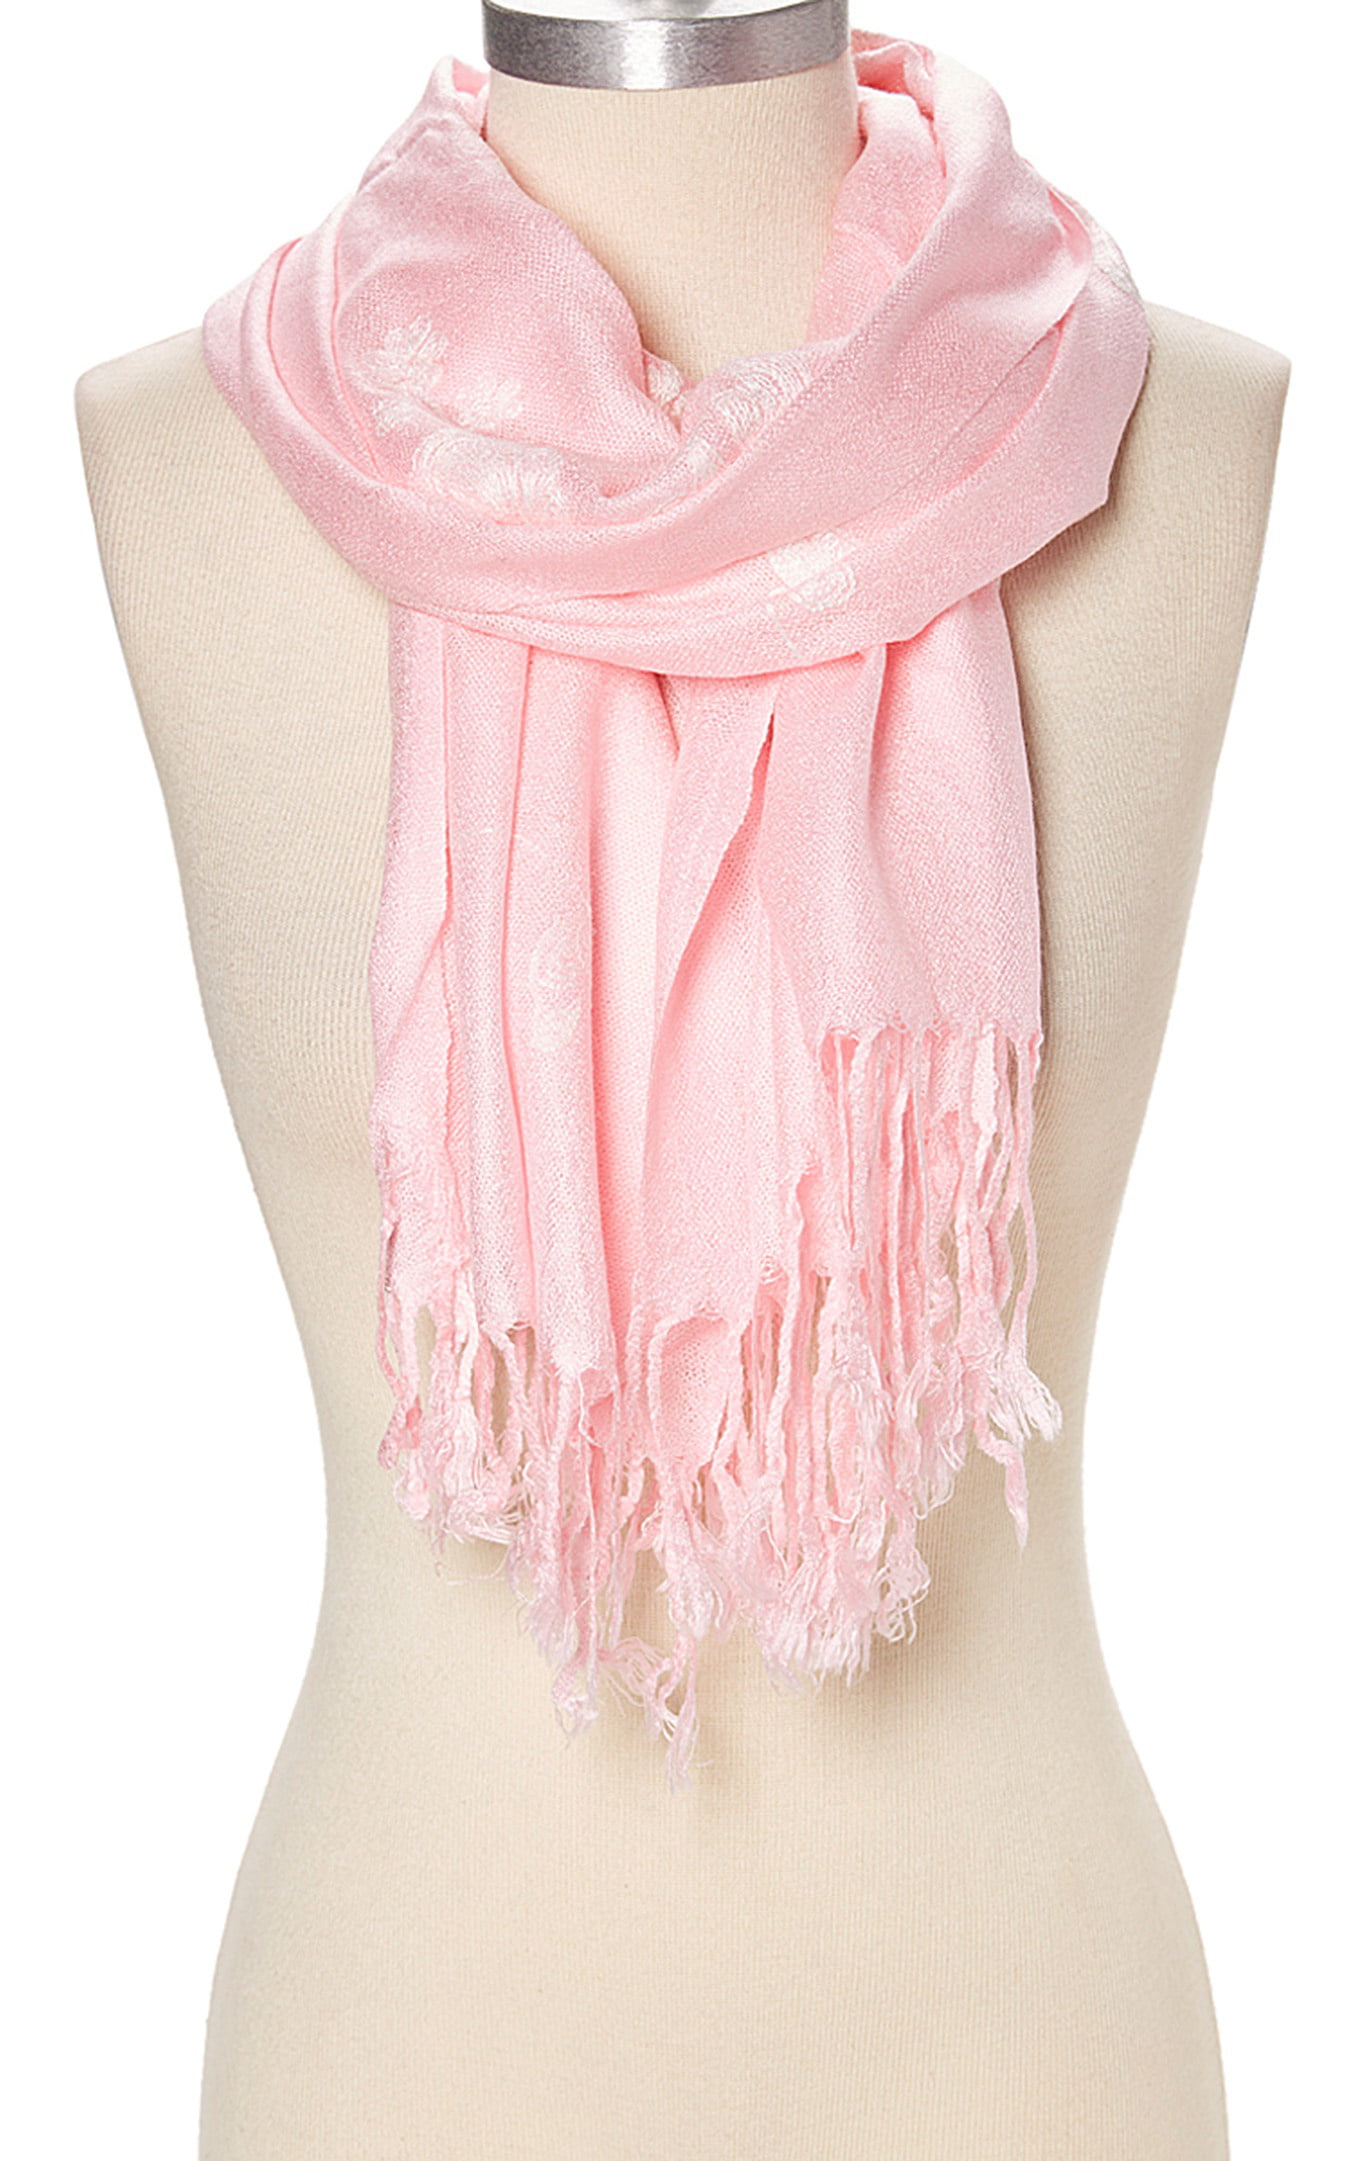 Women Fashion Embroidery Flowers Scarf Wrap Hijab Soft Scarves Baby Pink 